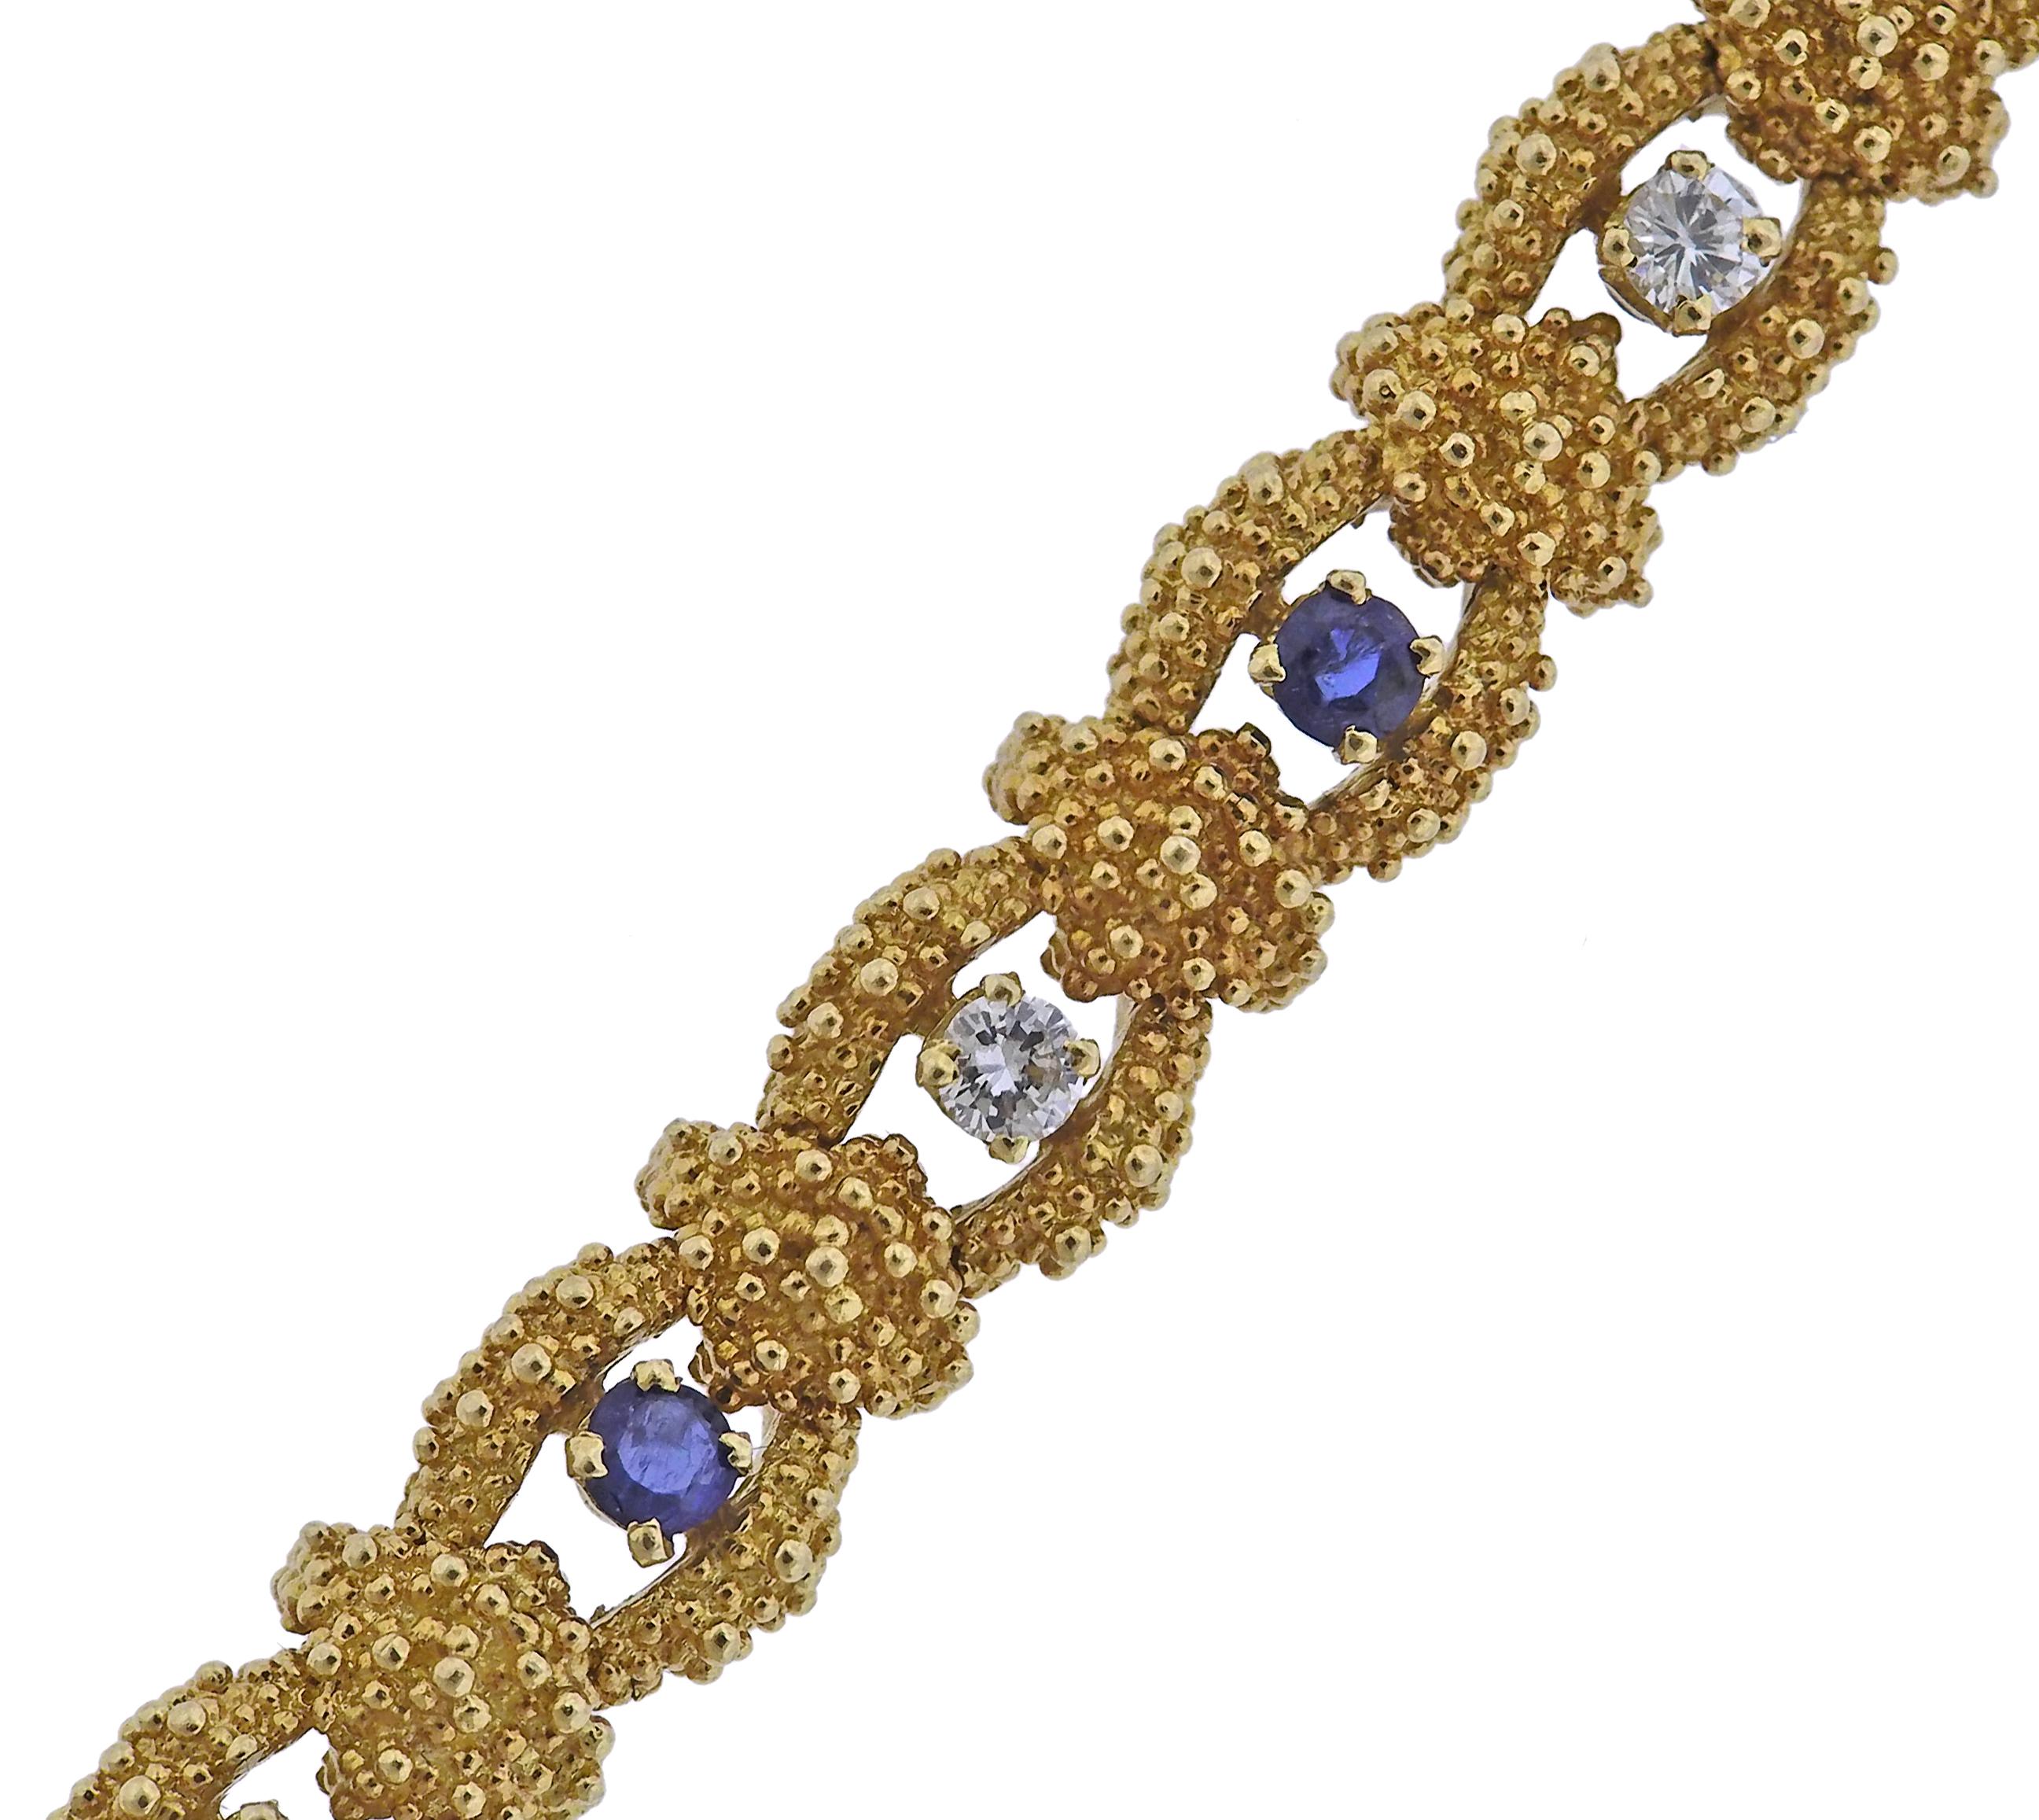 18k textured gold bracelet, with blue sapphires and approx. 0.80ctw in diamonds. Bracelet is 7